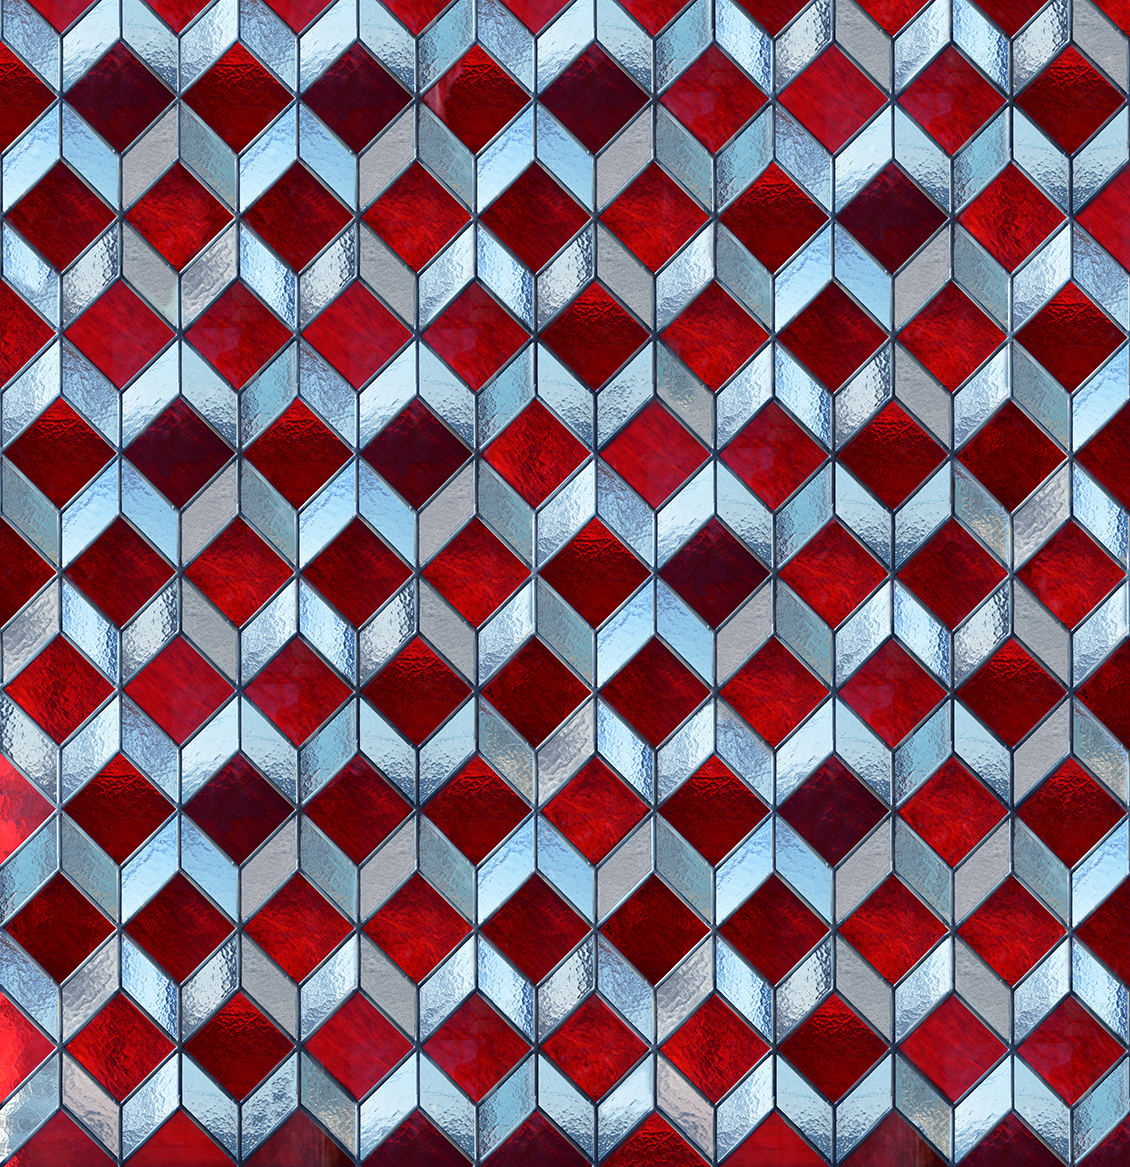 Geometric wallpaper realistic effect, with diamond pattern glass, red and white